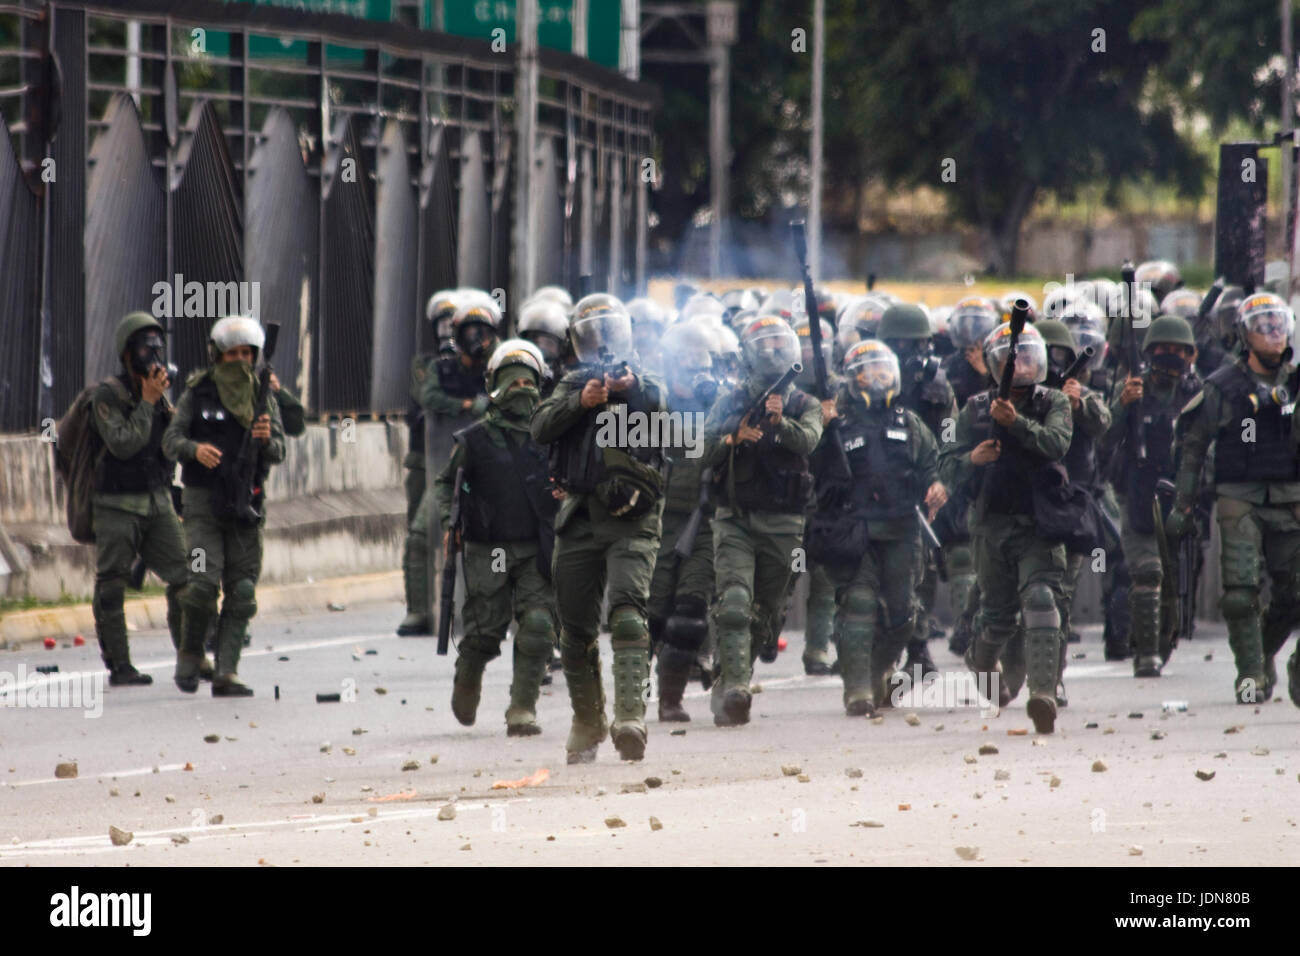 Members of the Bolivarian National Guard open fire against demonstrators during a protest against the government of Nicolas Maduro in Caracas. Stock Photo